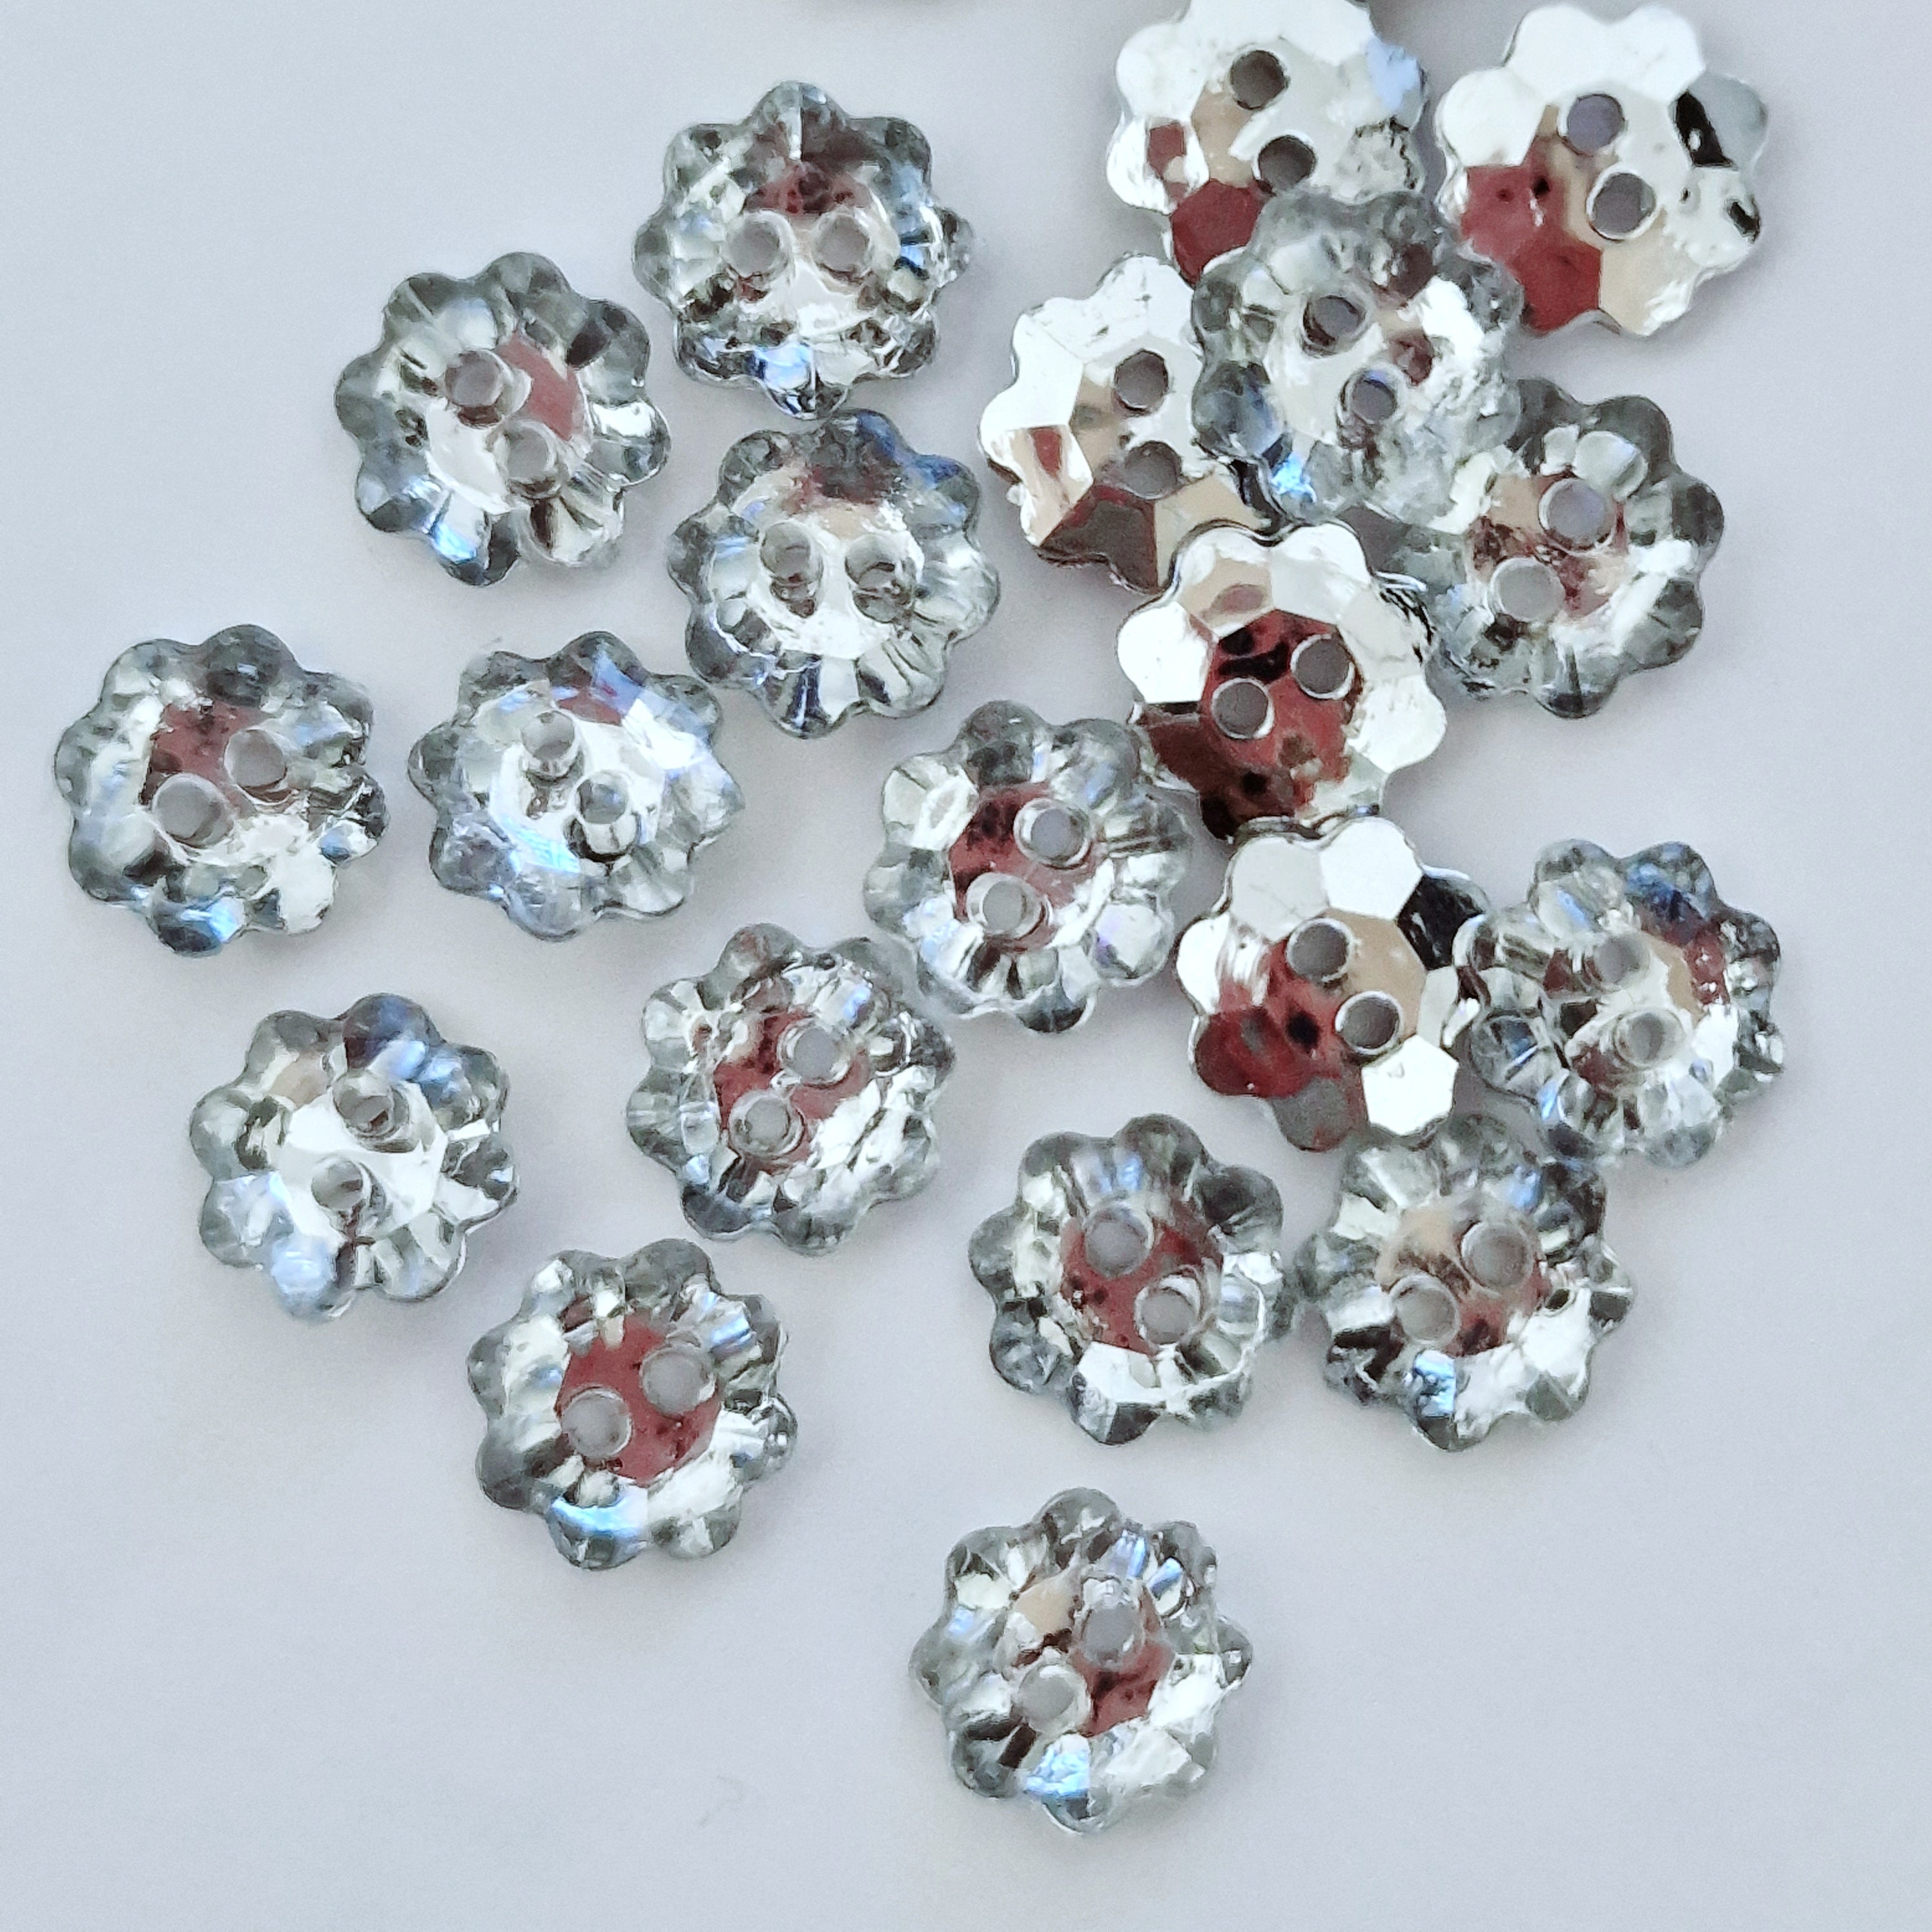 MajorCrafts 50pcs 10mm Crystal Clear 2 Holes Acrylic Flower Small Sewing Buttons